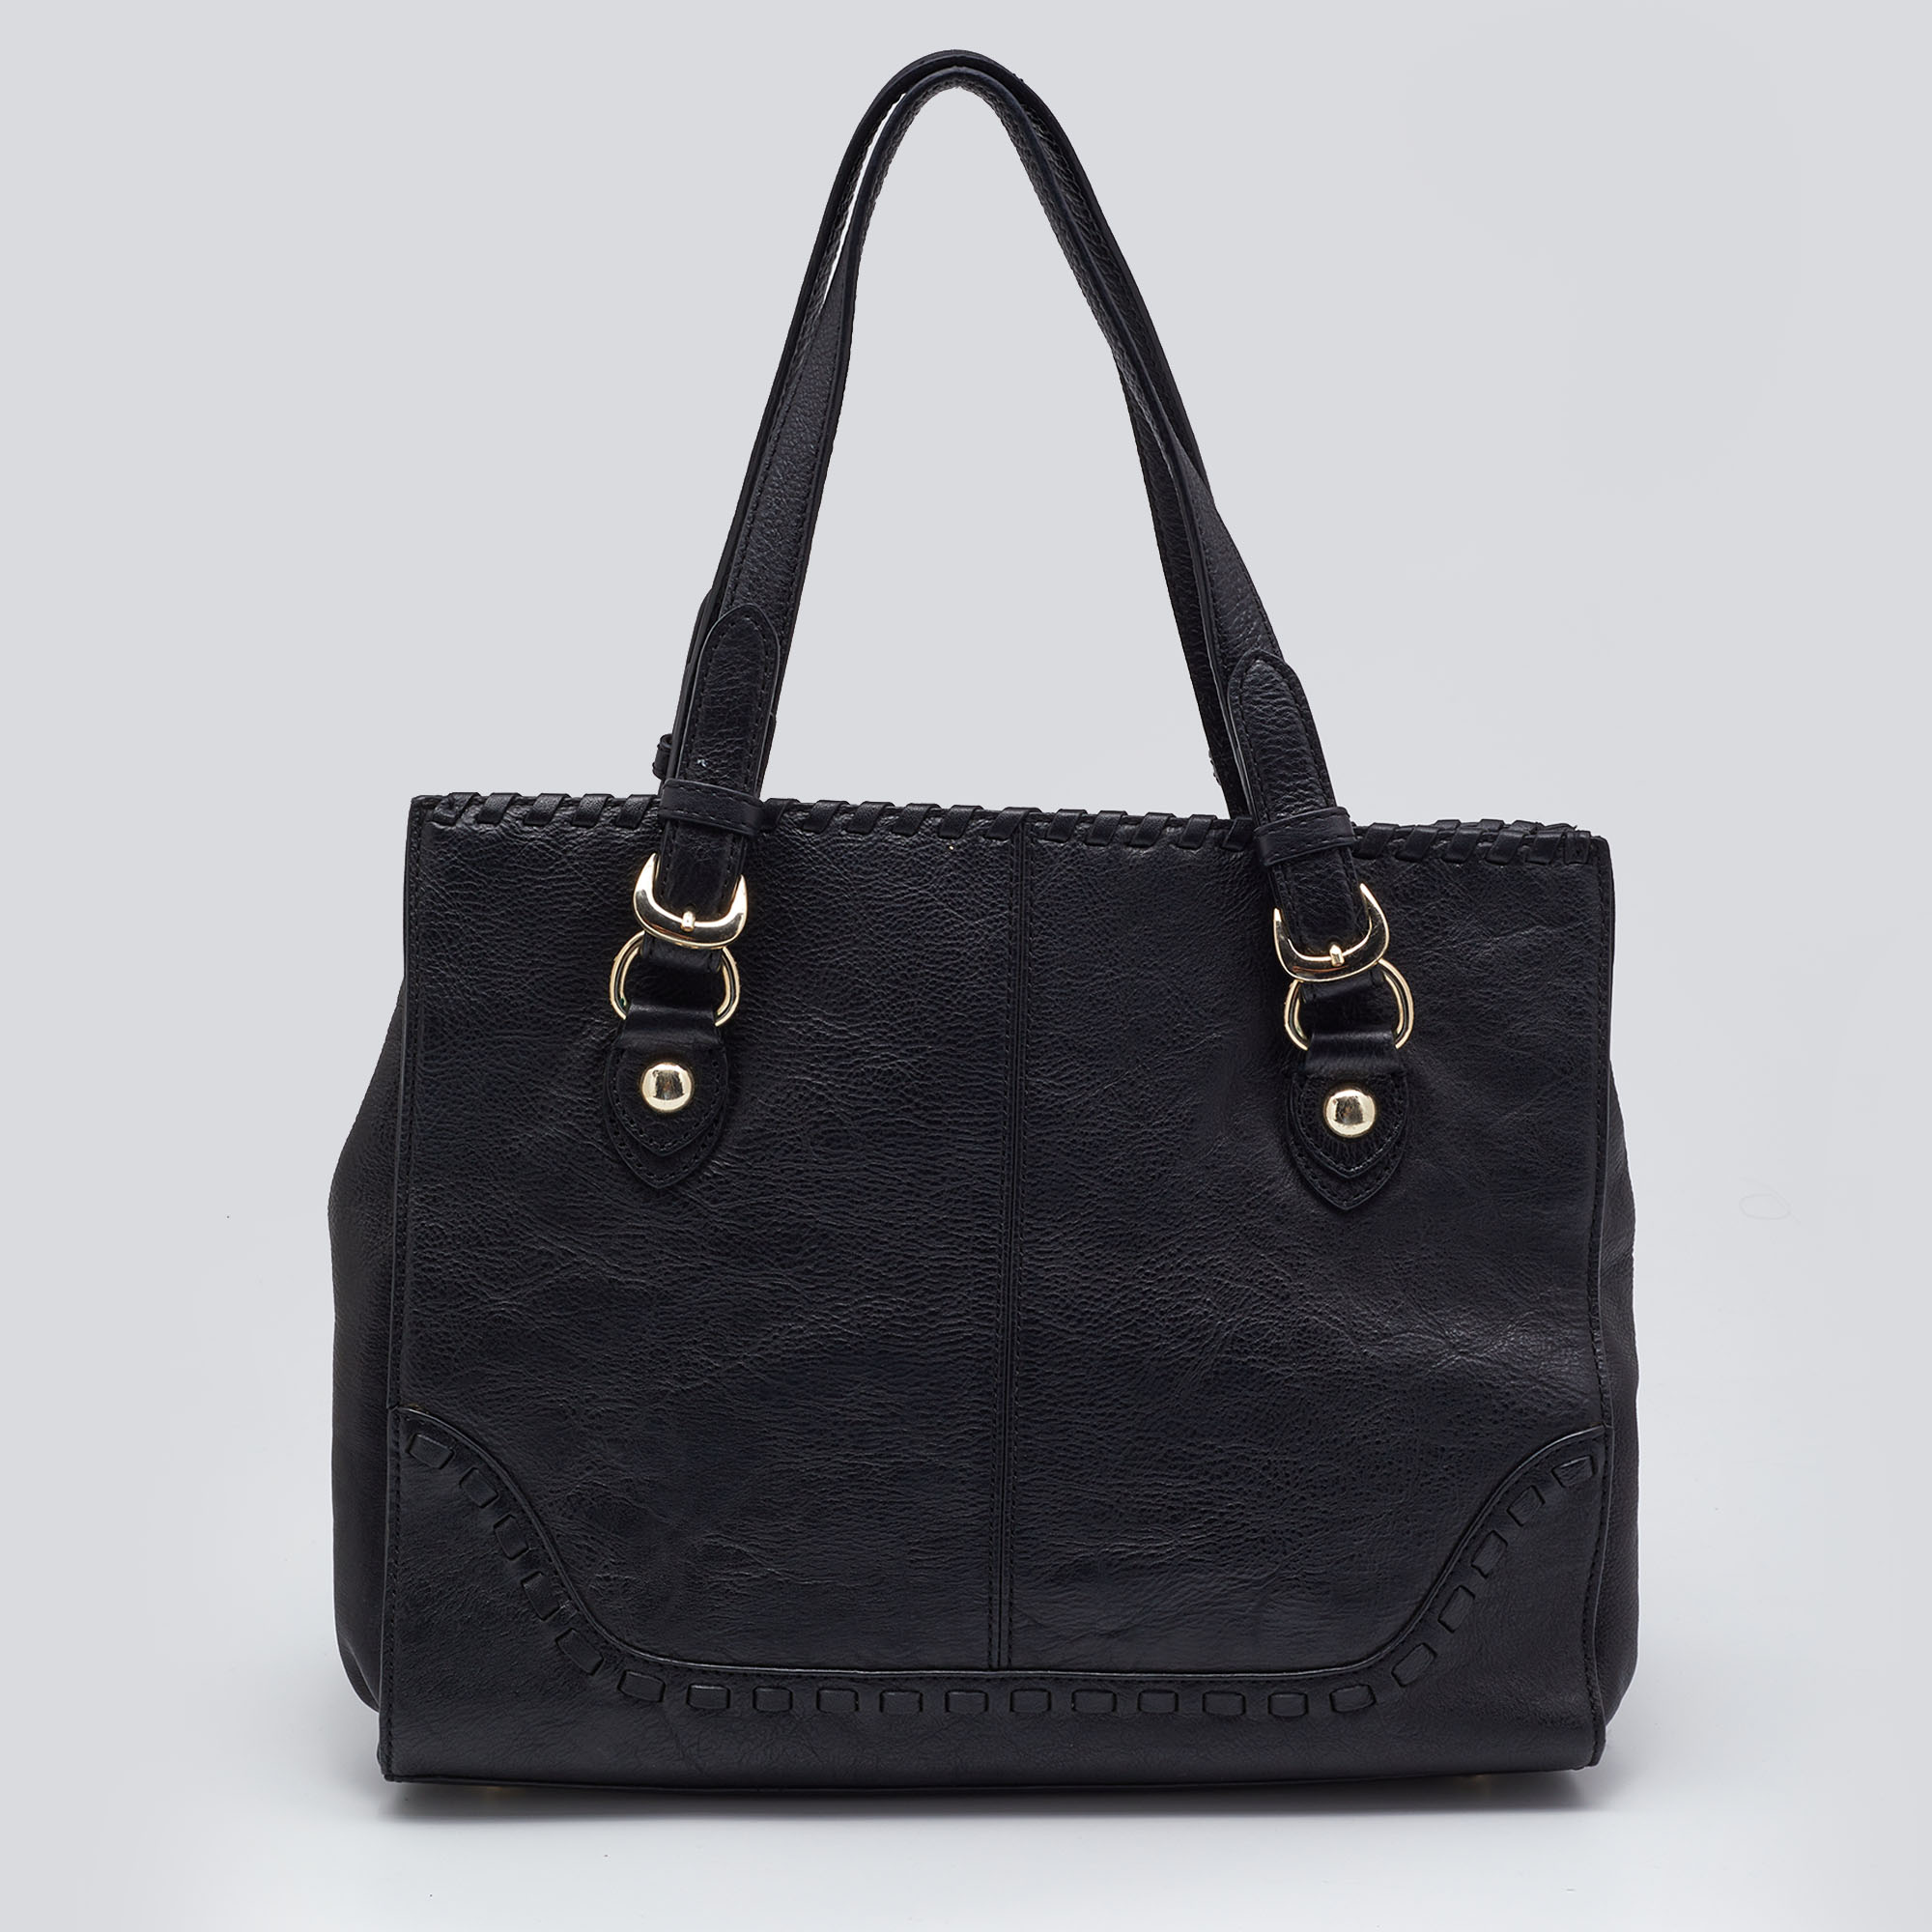 DKNY Black Leather Beekman French Whipstitch Trim Tote